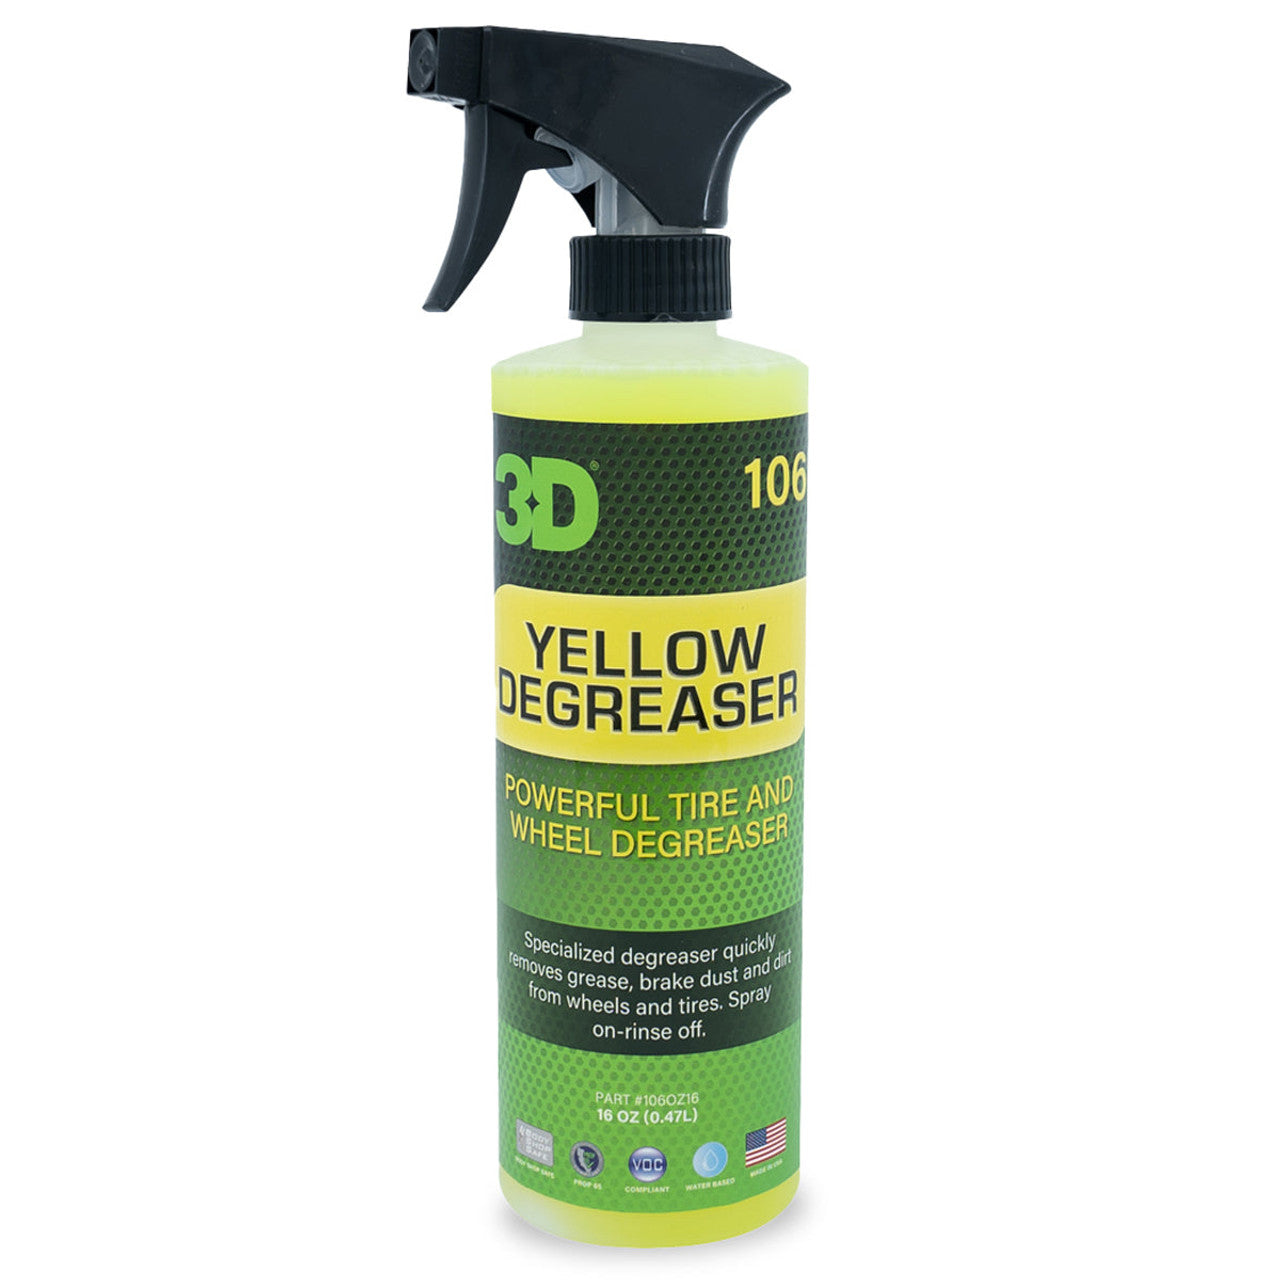 3D Yellow Degreaser - Tire & Trim Cleaner